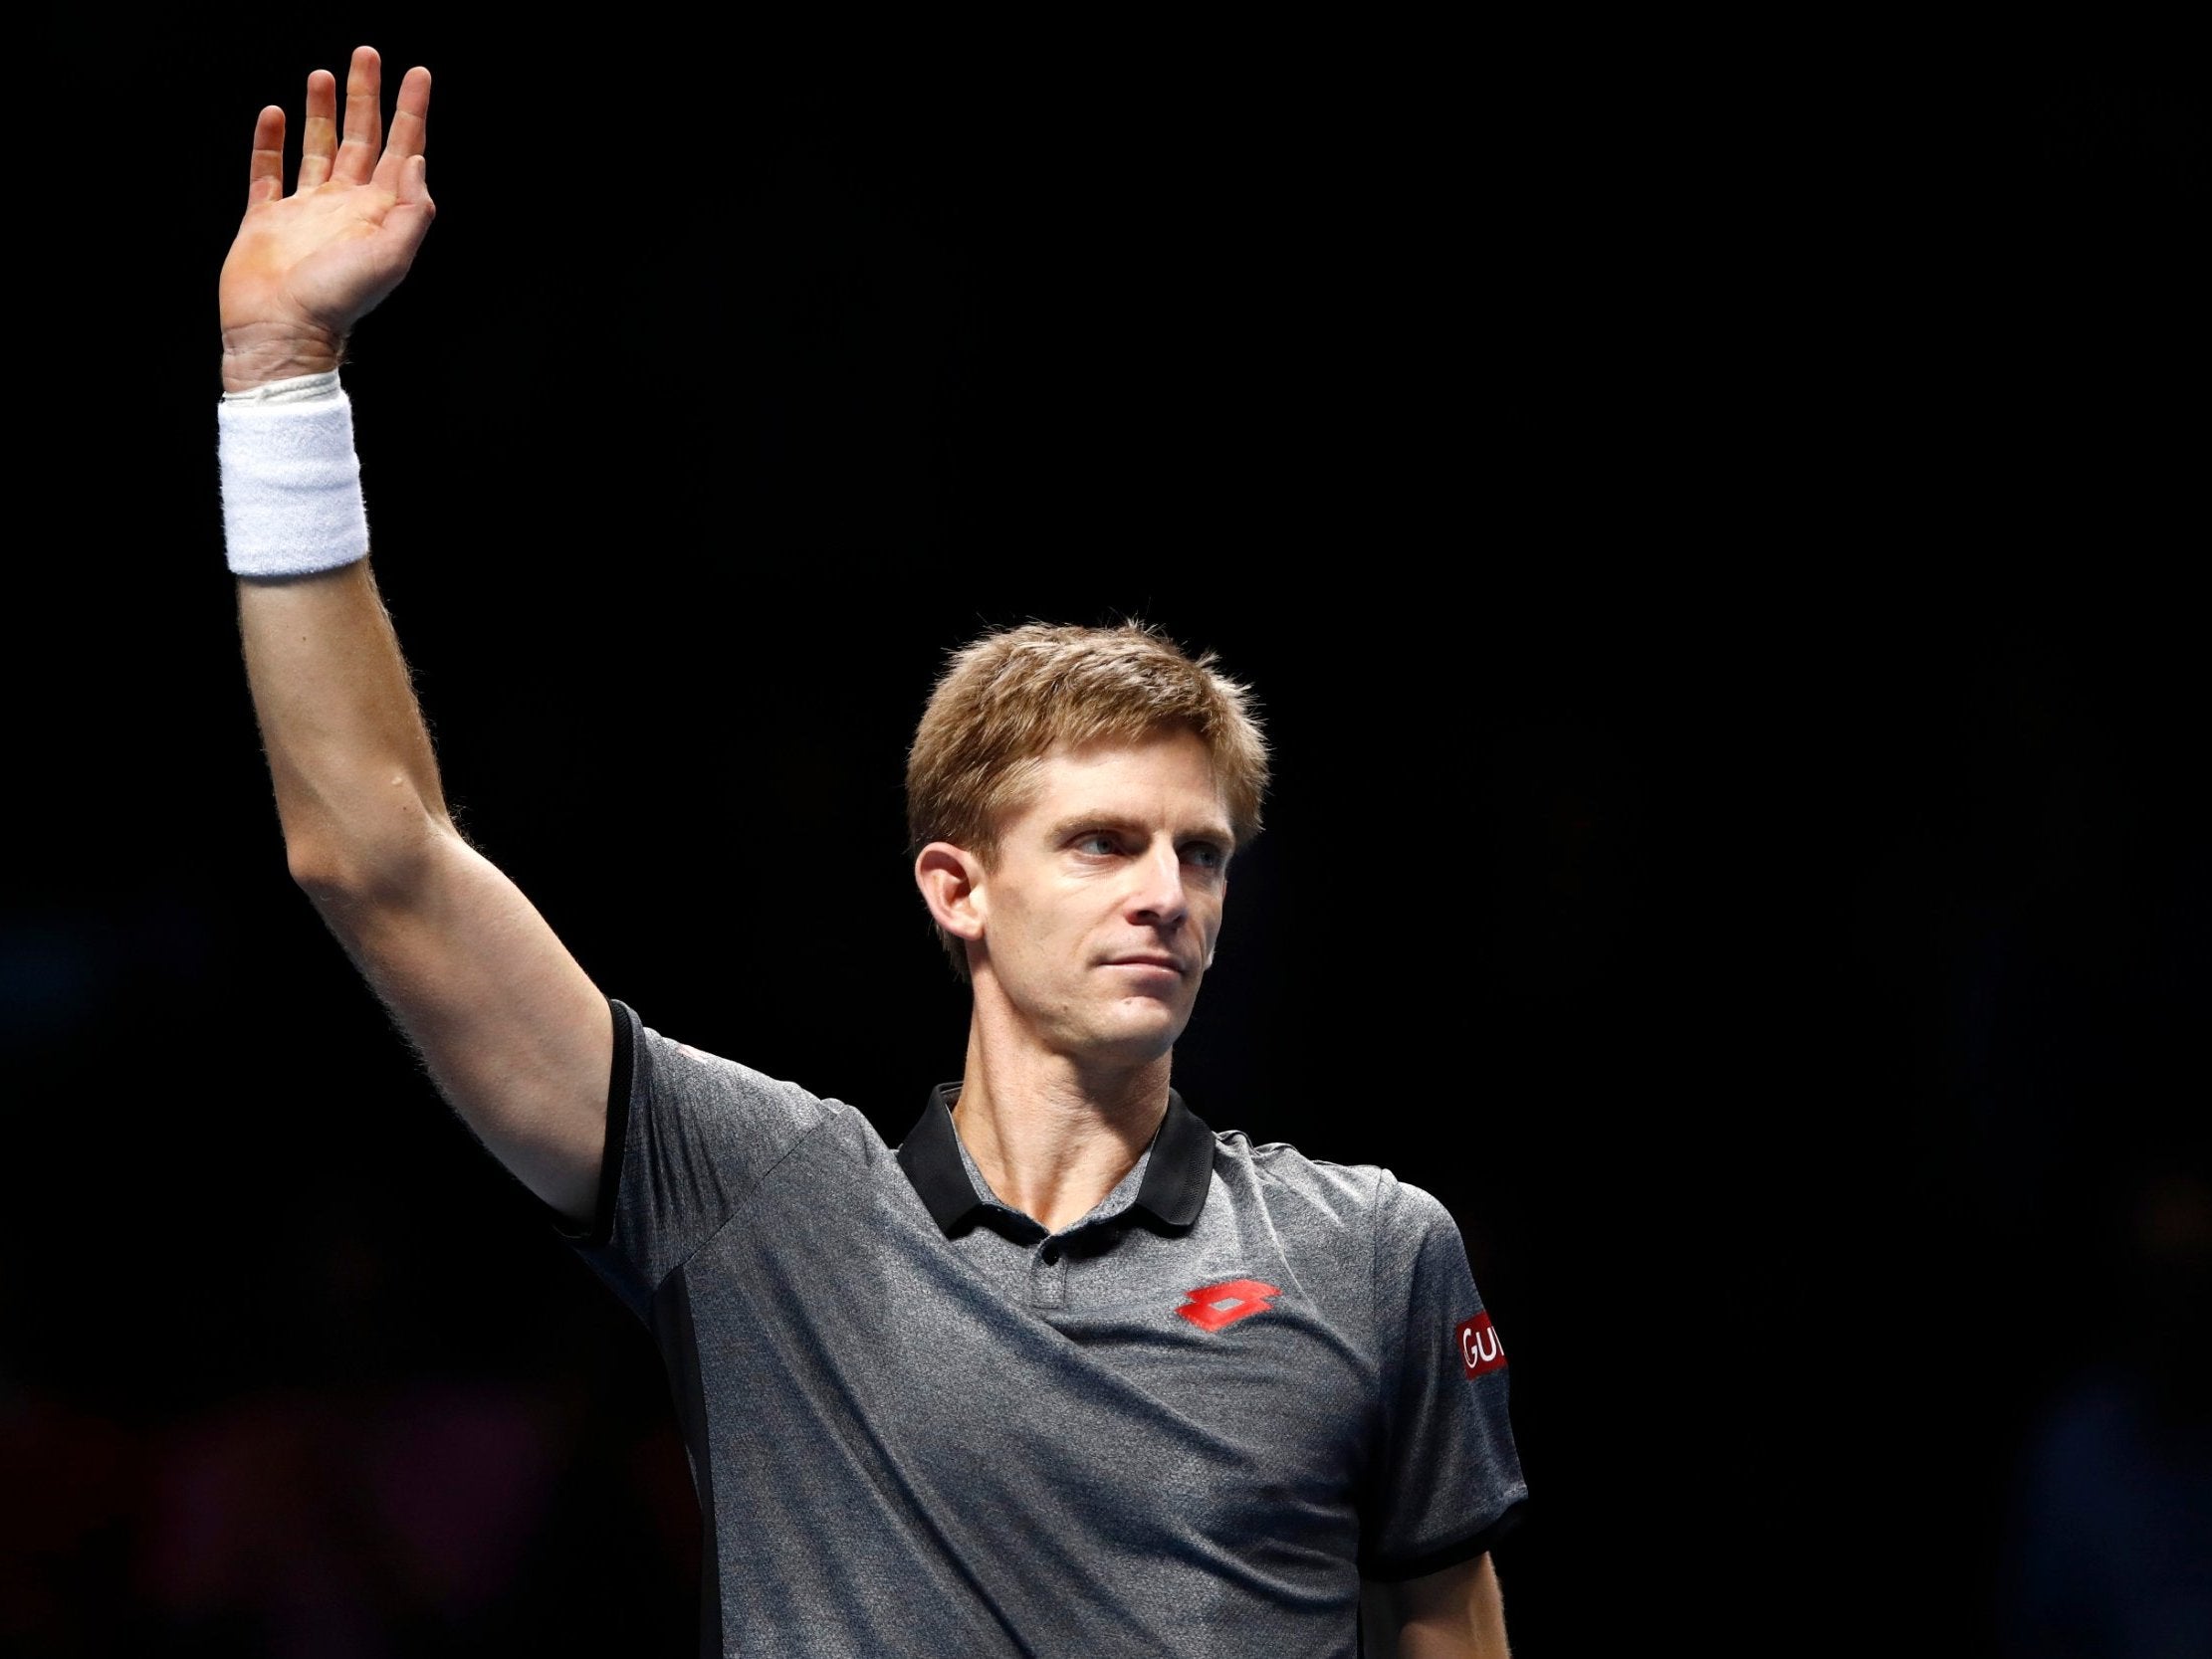 Kevin Anderson sealed victory with a tense 17-minute tie-break